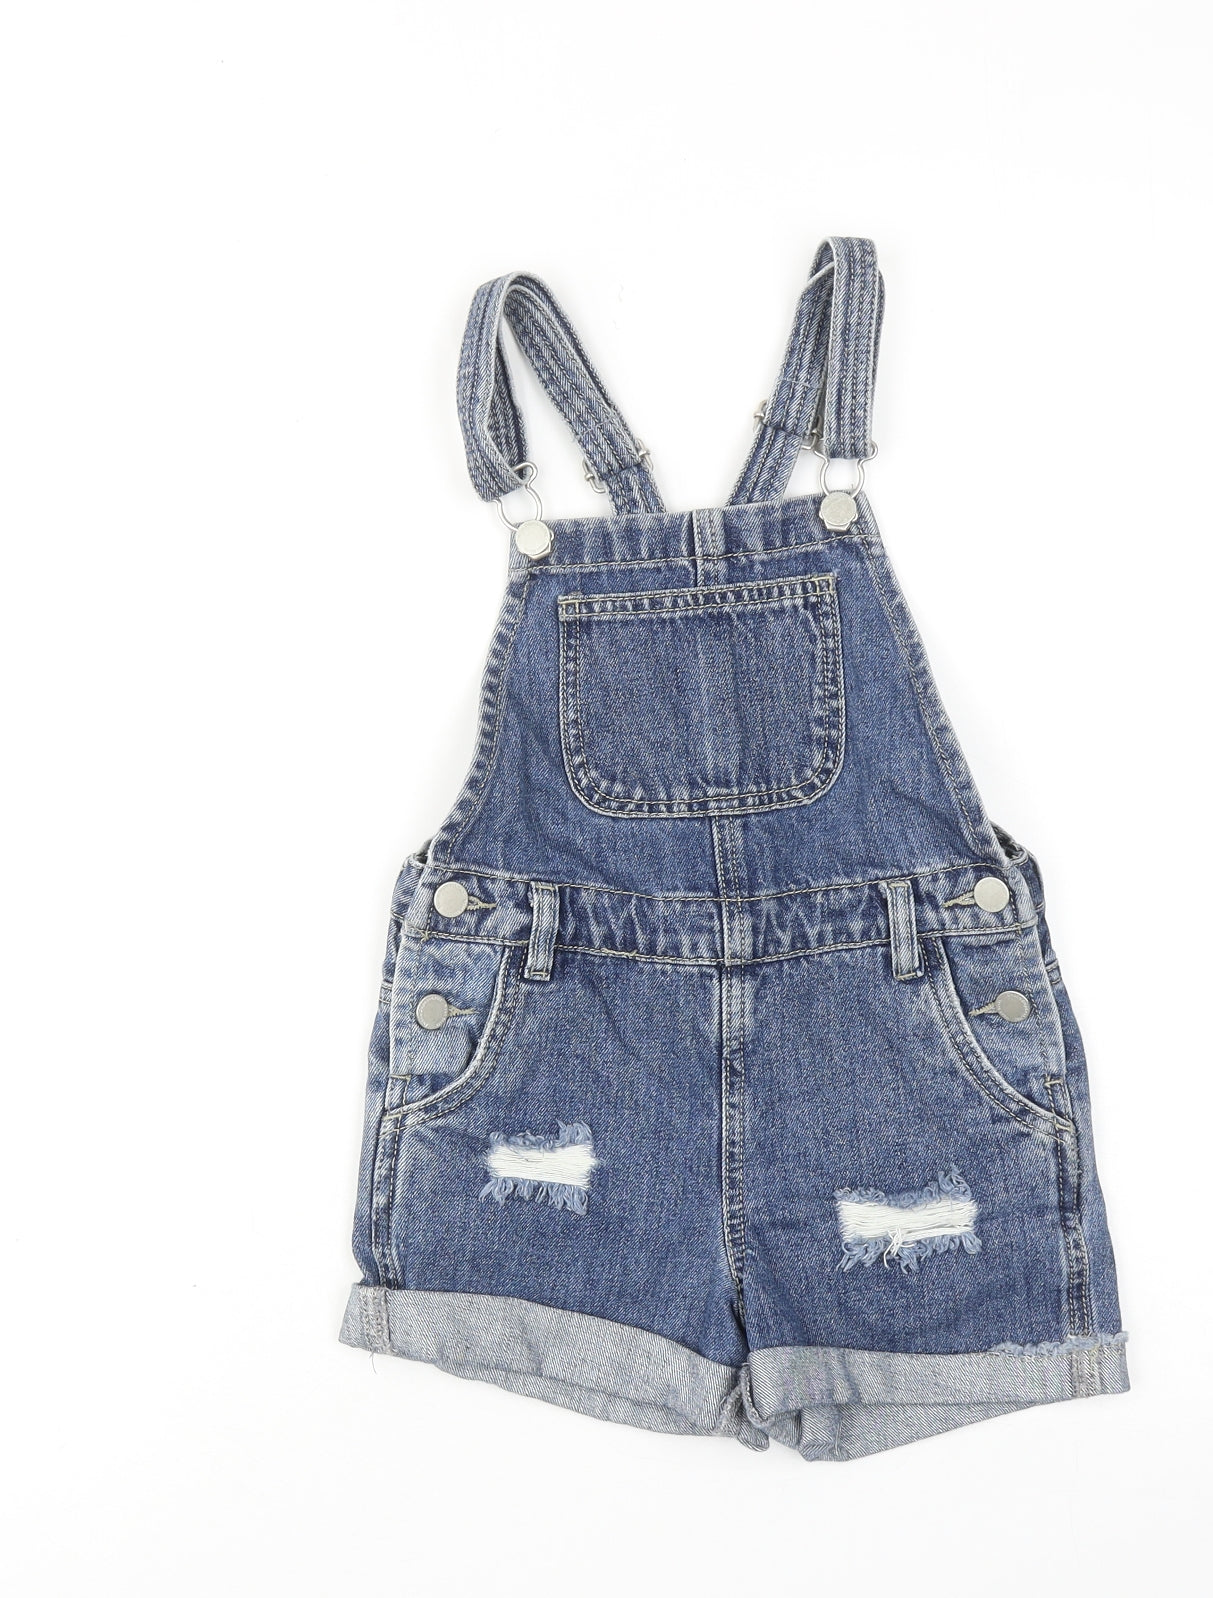 NEXT Girls Blue Cotton Dungaree One-Piece Size 7 Years Button - Distressed